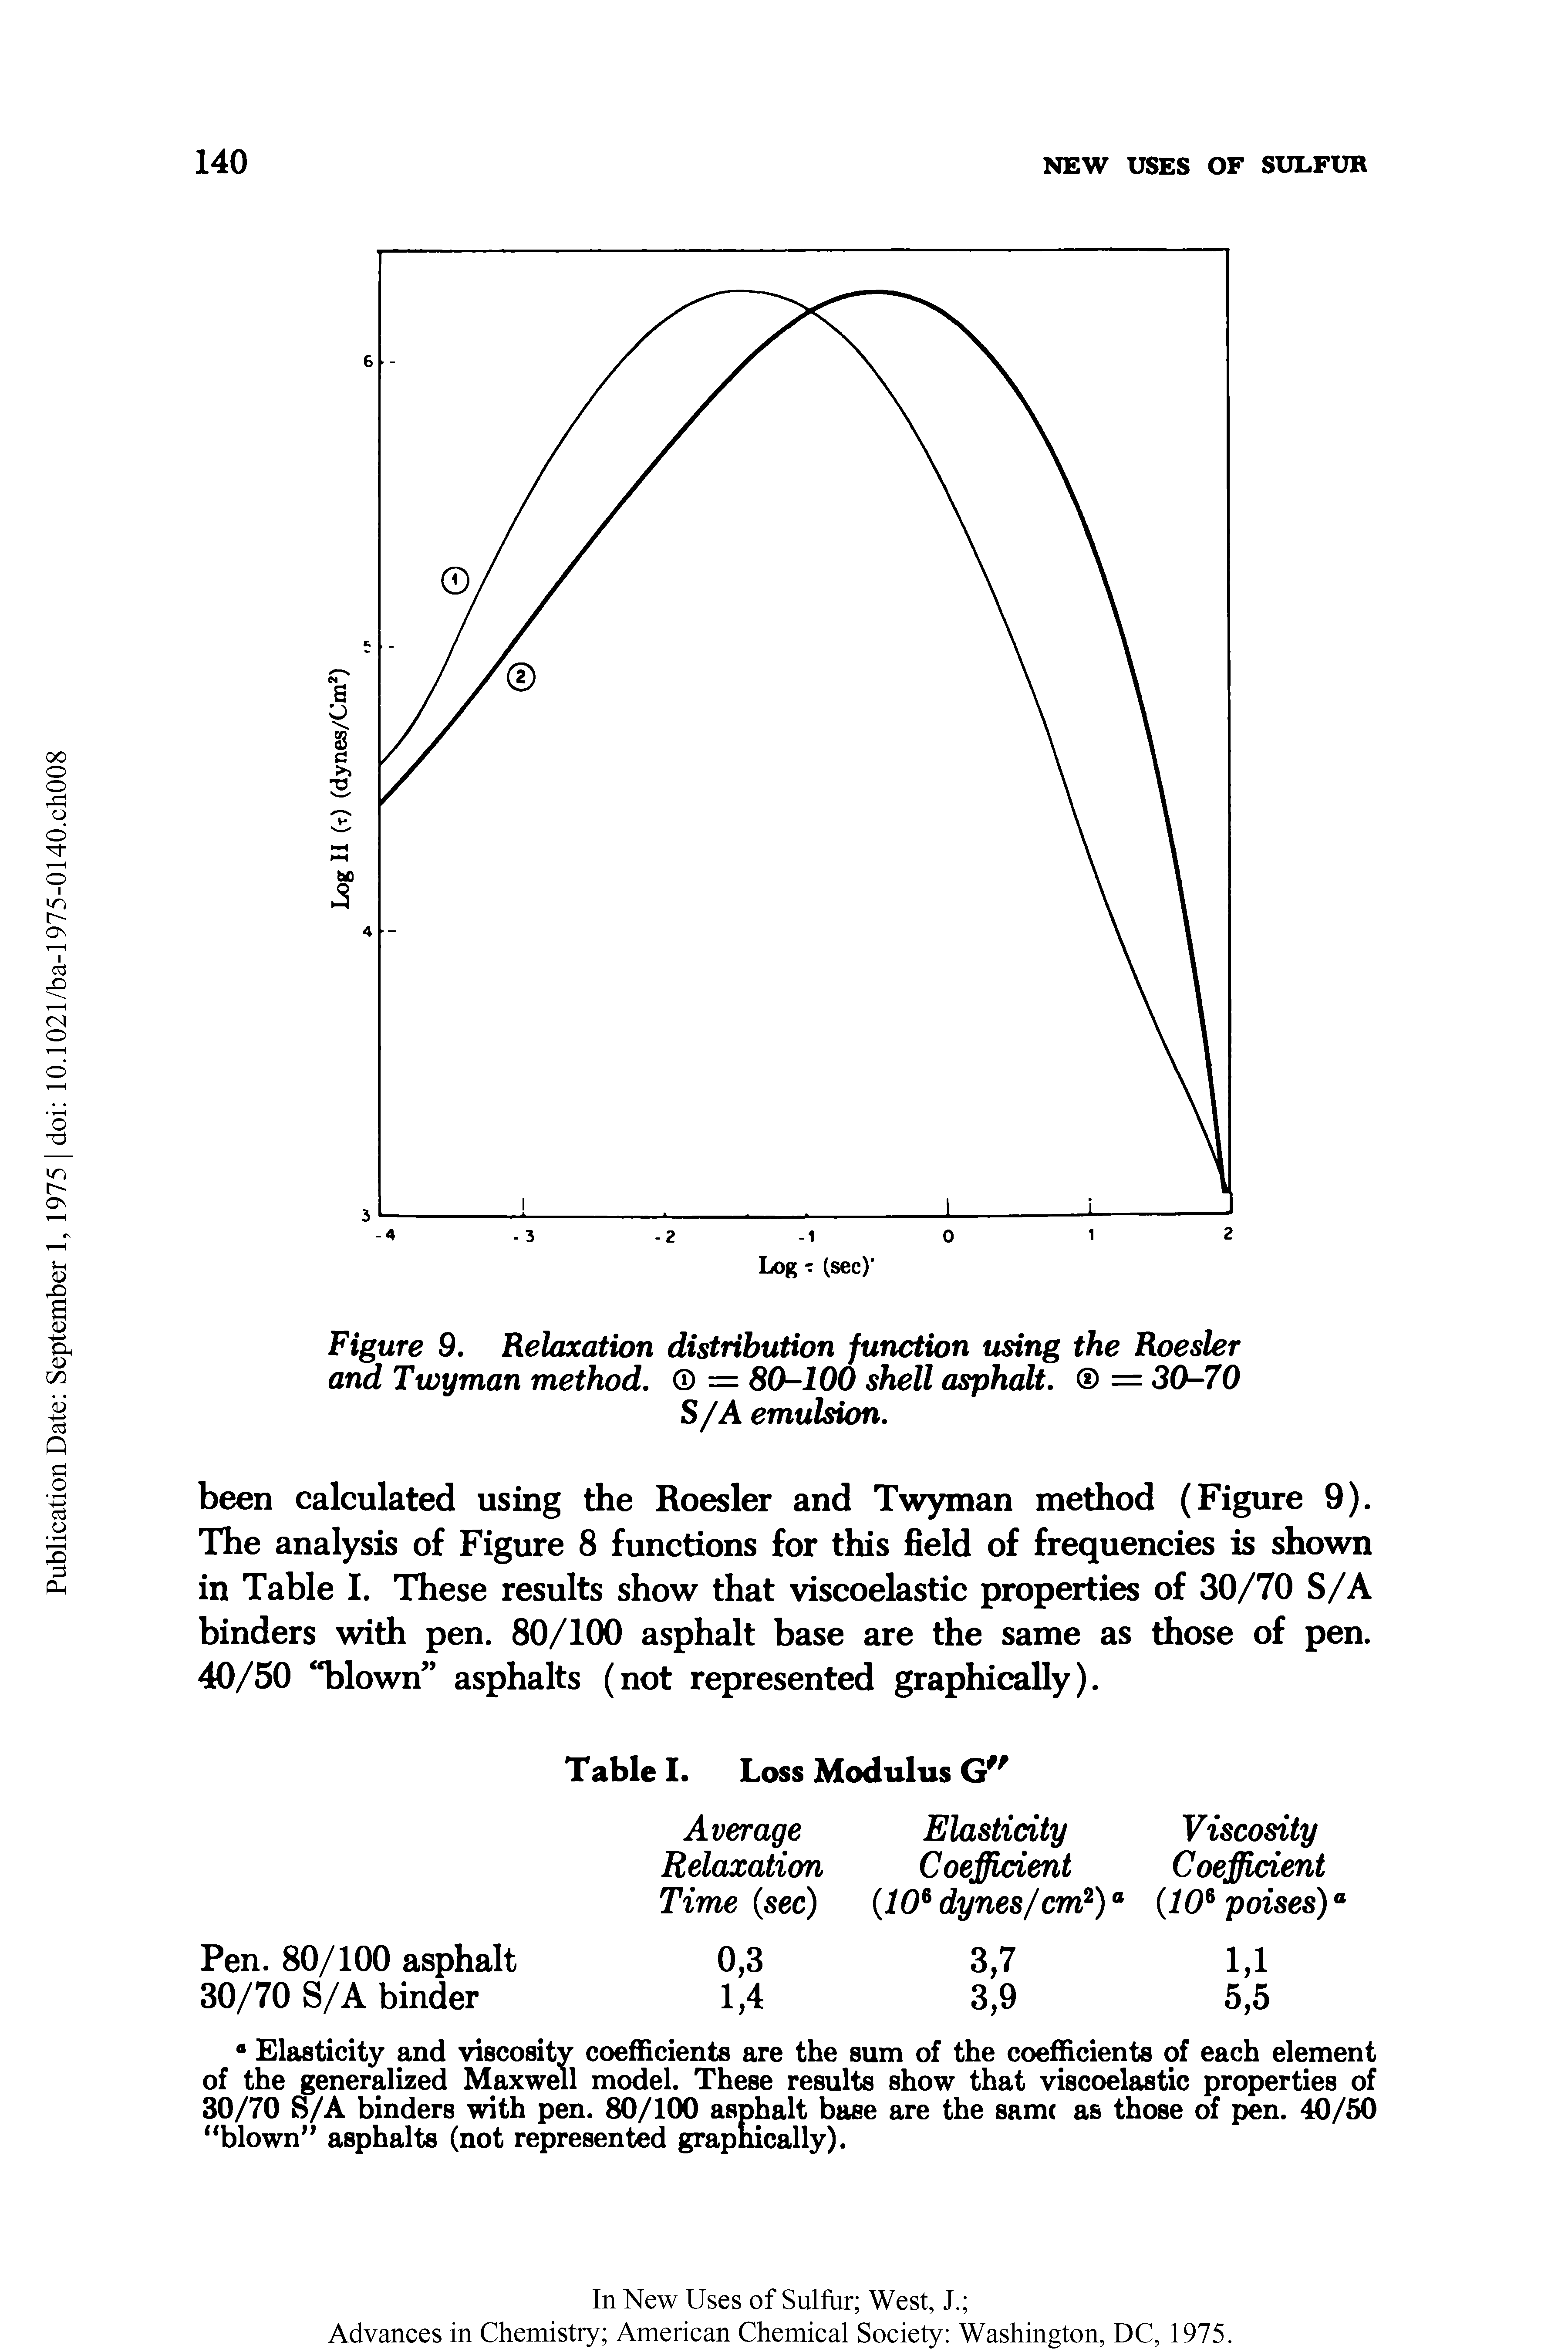 Figure 9. Relaxation distribution function using the Roesler and Twyman method. = 80-100 shell asphalt. = 30-70 S/A emulsion.